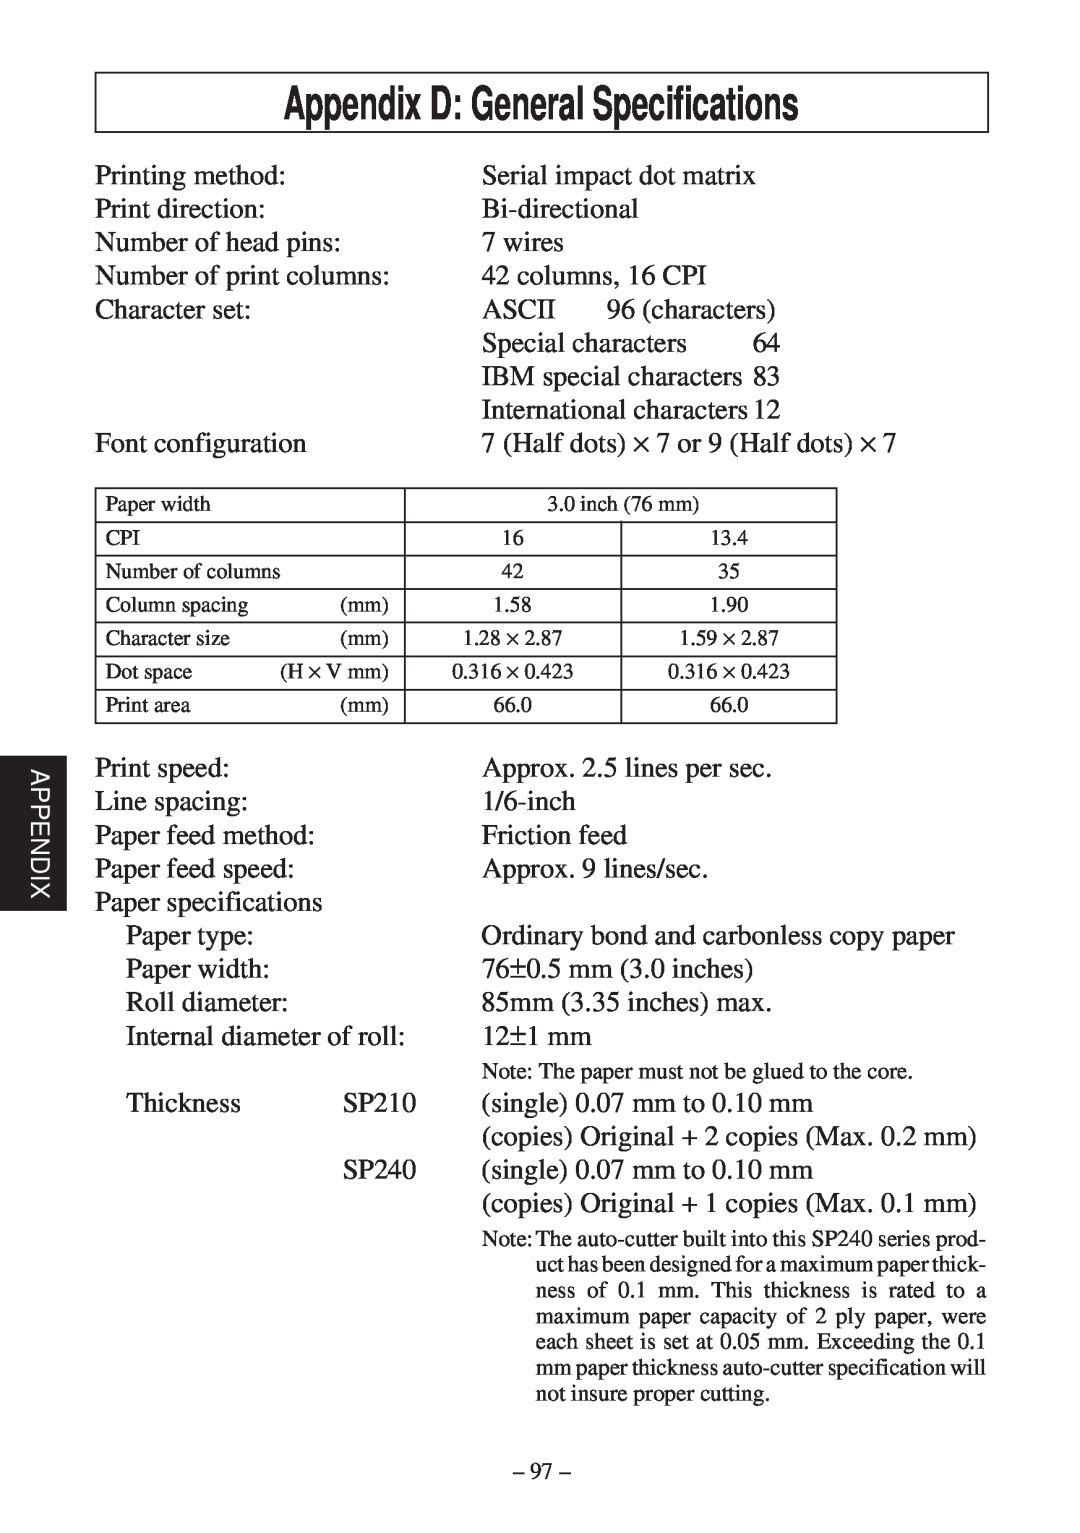 Star Micronics SP200F user manual Appendix D General Specifications, Note The paper must not be glued to the core 